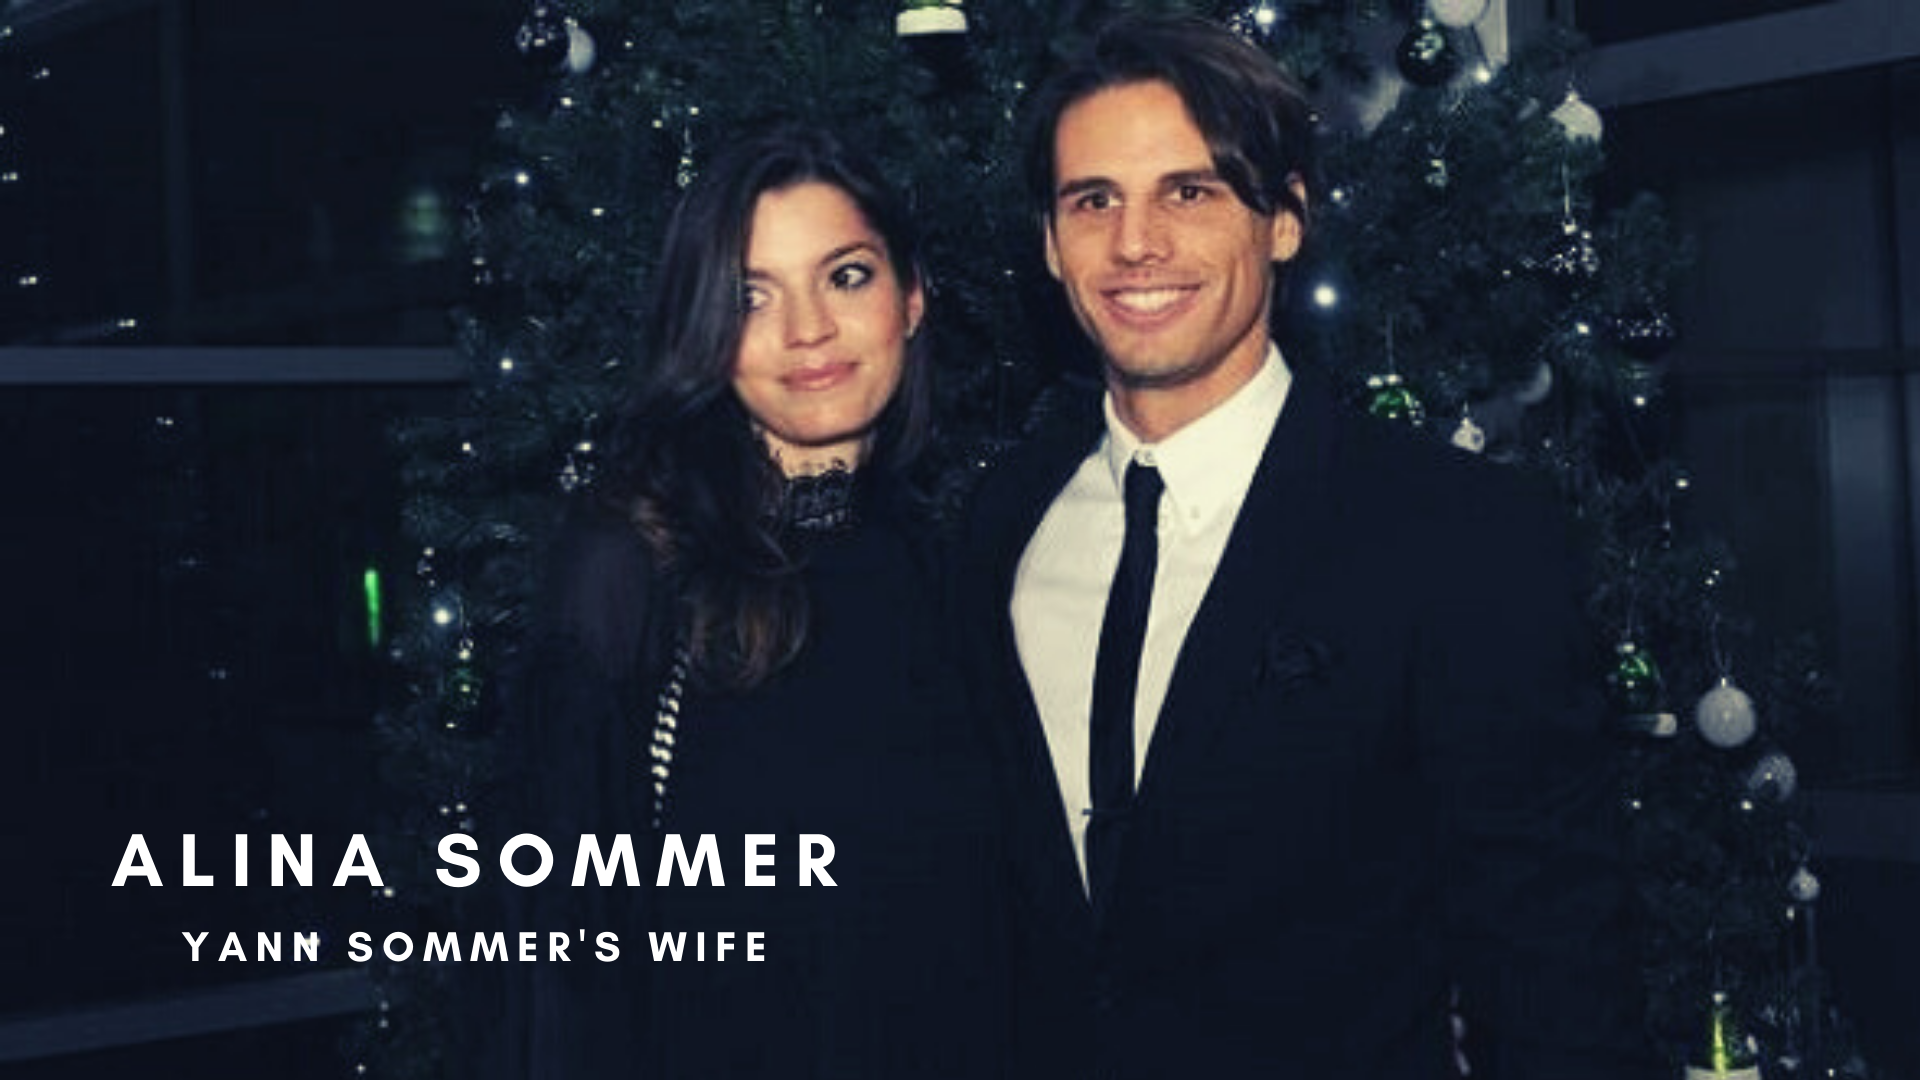 Yann Sommer Wife Alina Sommer Wiki 2022- Age, Net Worth, Career, Kids, Family and more. (Original Image by imago/ Wiechmann)